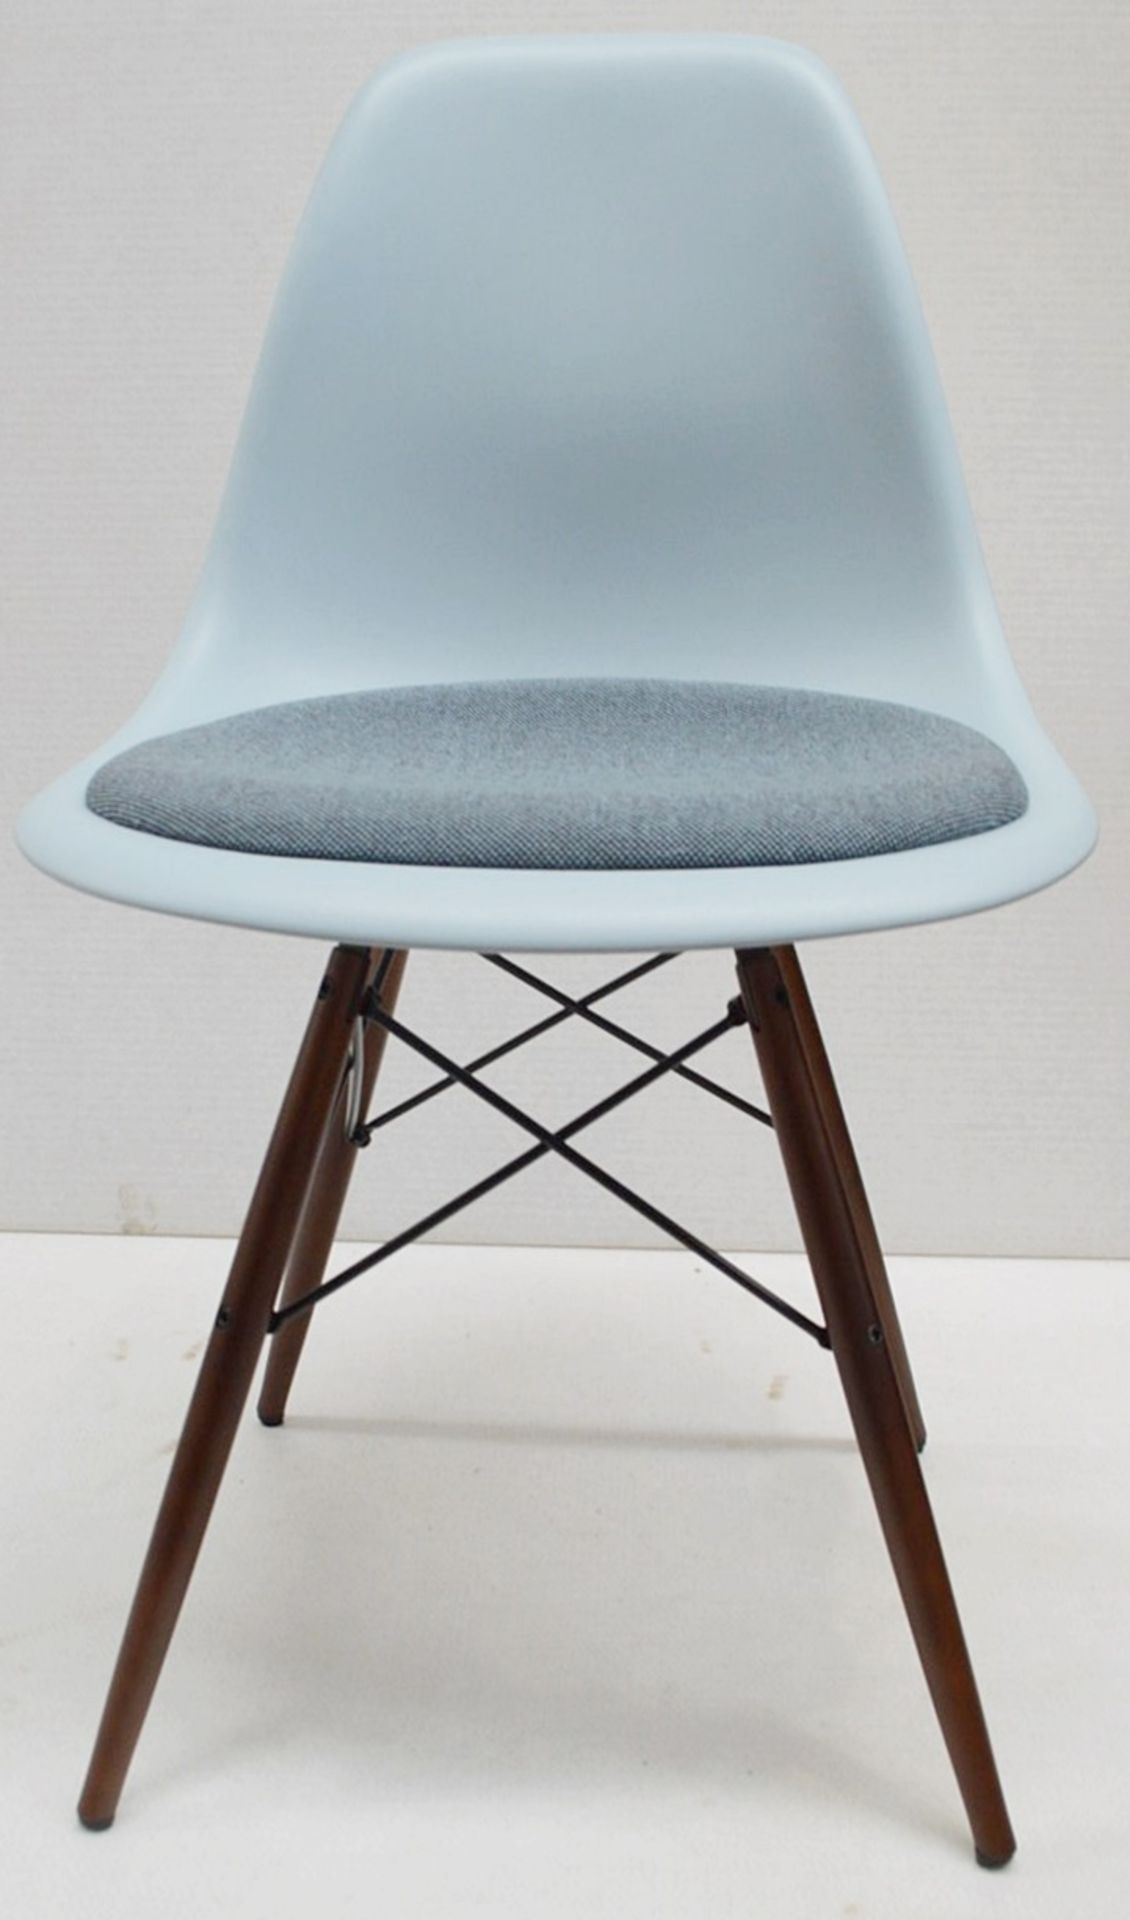 1 x VITRA Eames DSW Designer Chair With Upholsted Seat And Maple Base In A Dark Stain